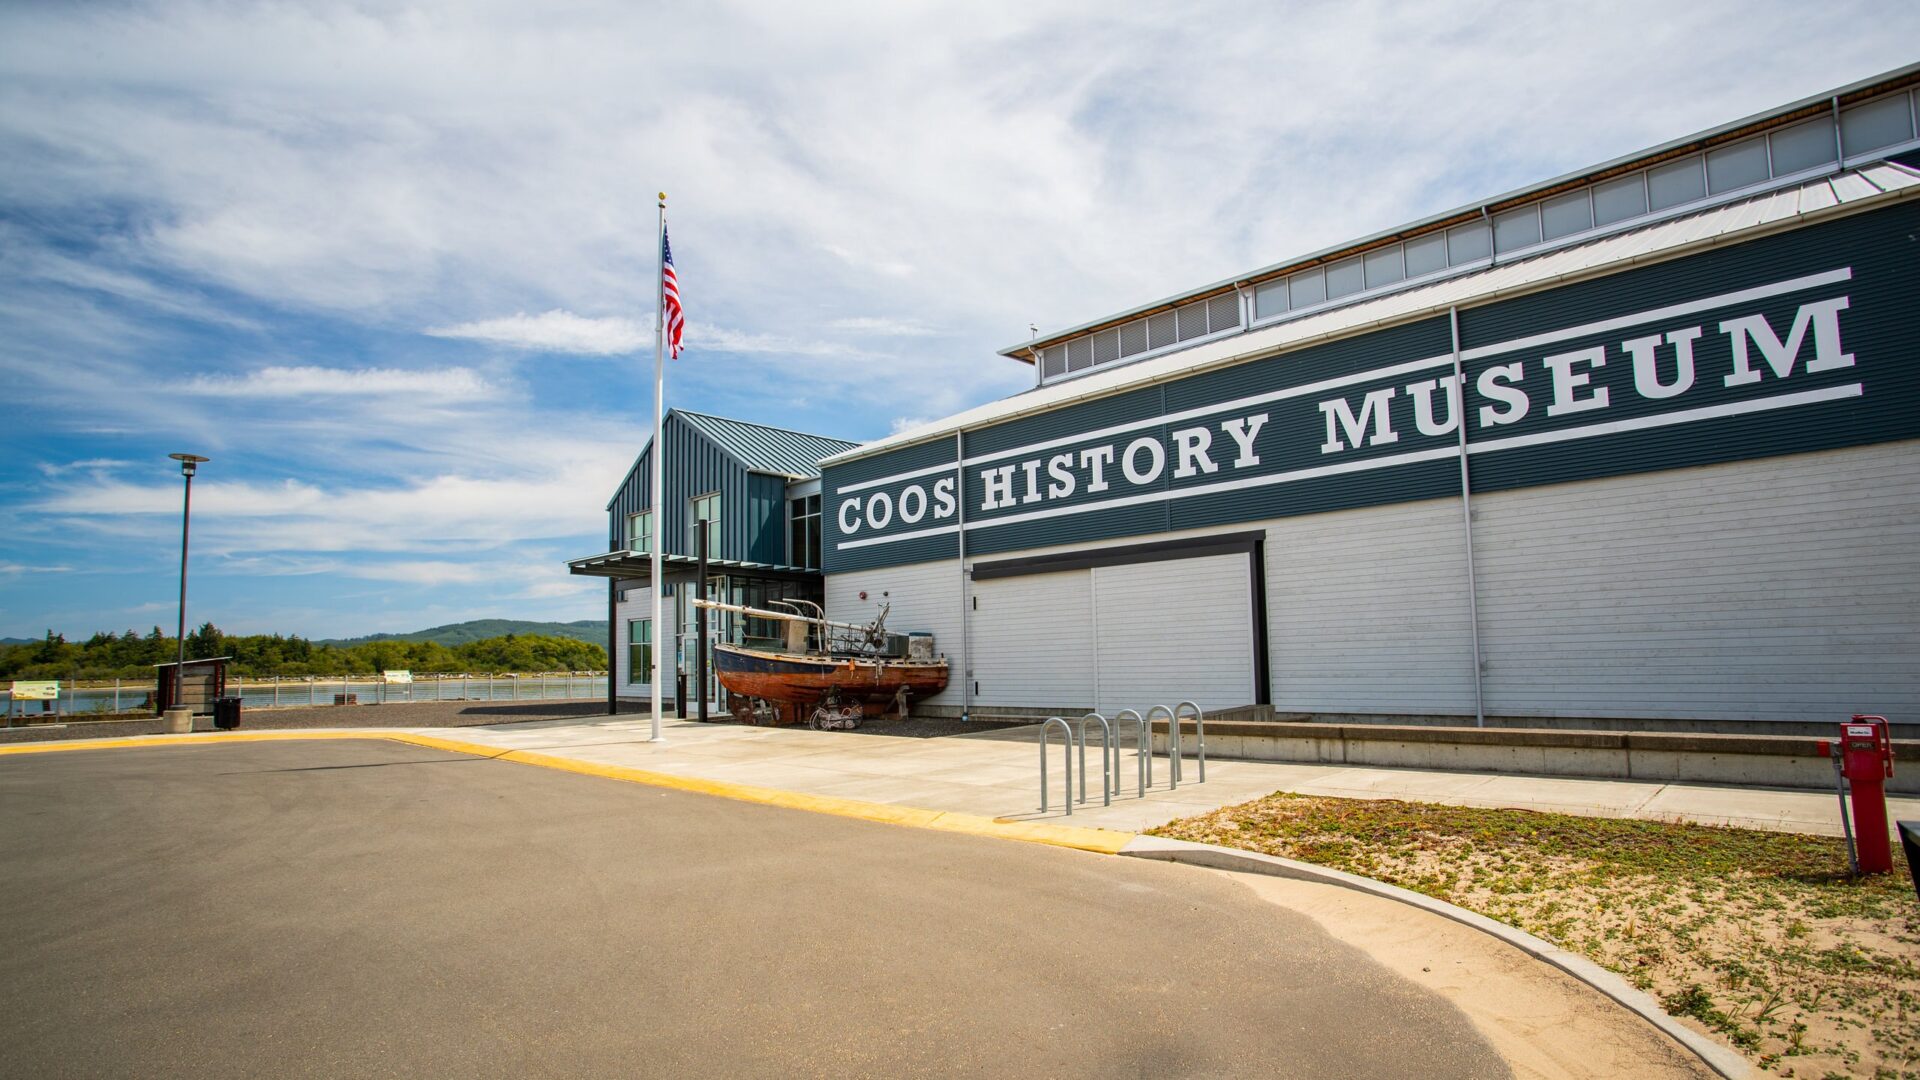 484306-coos-historical-and-maritime-museum